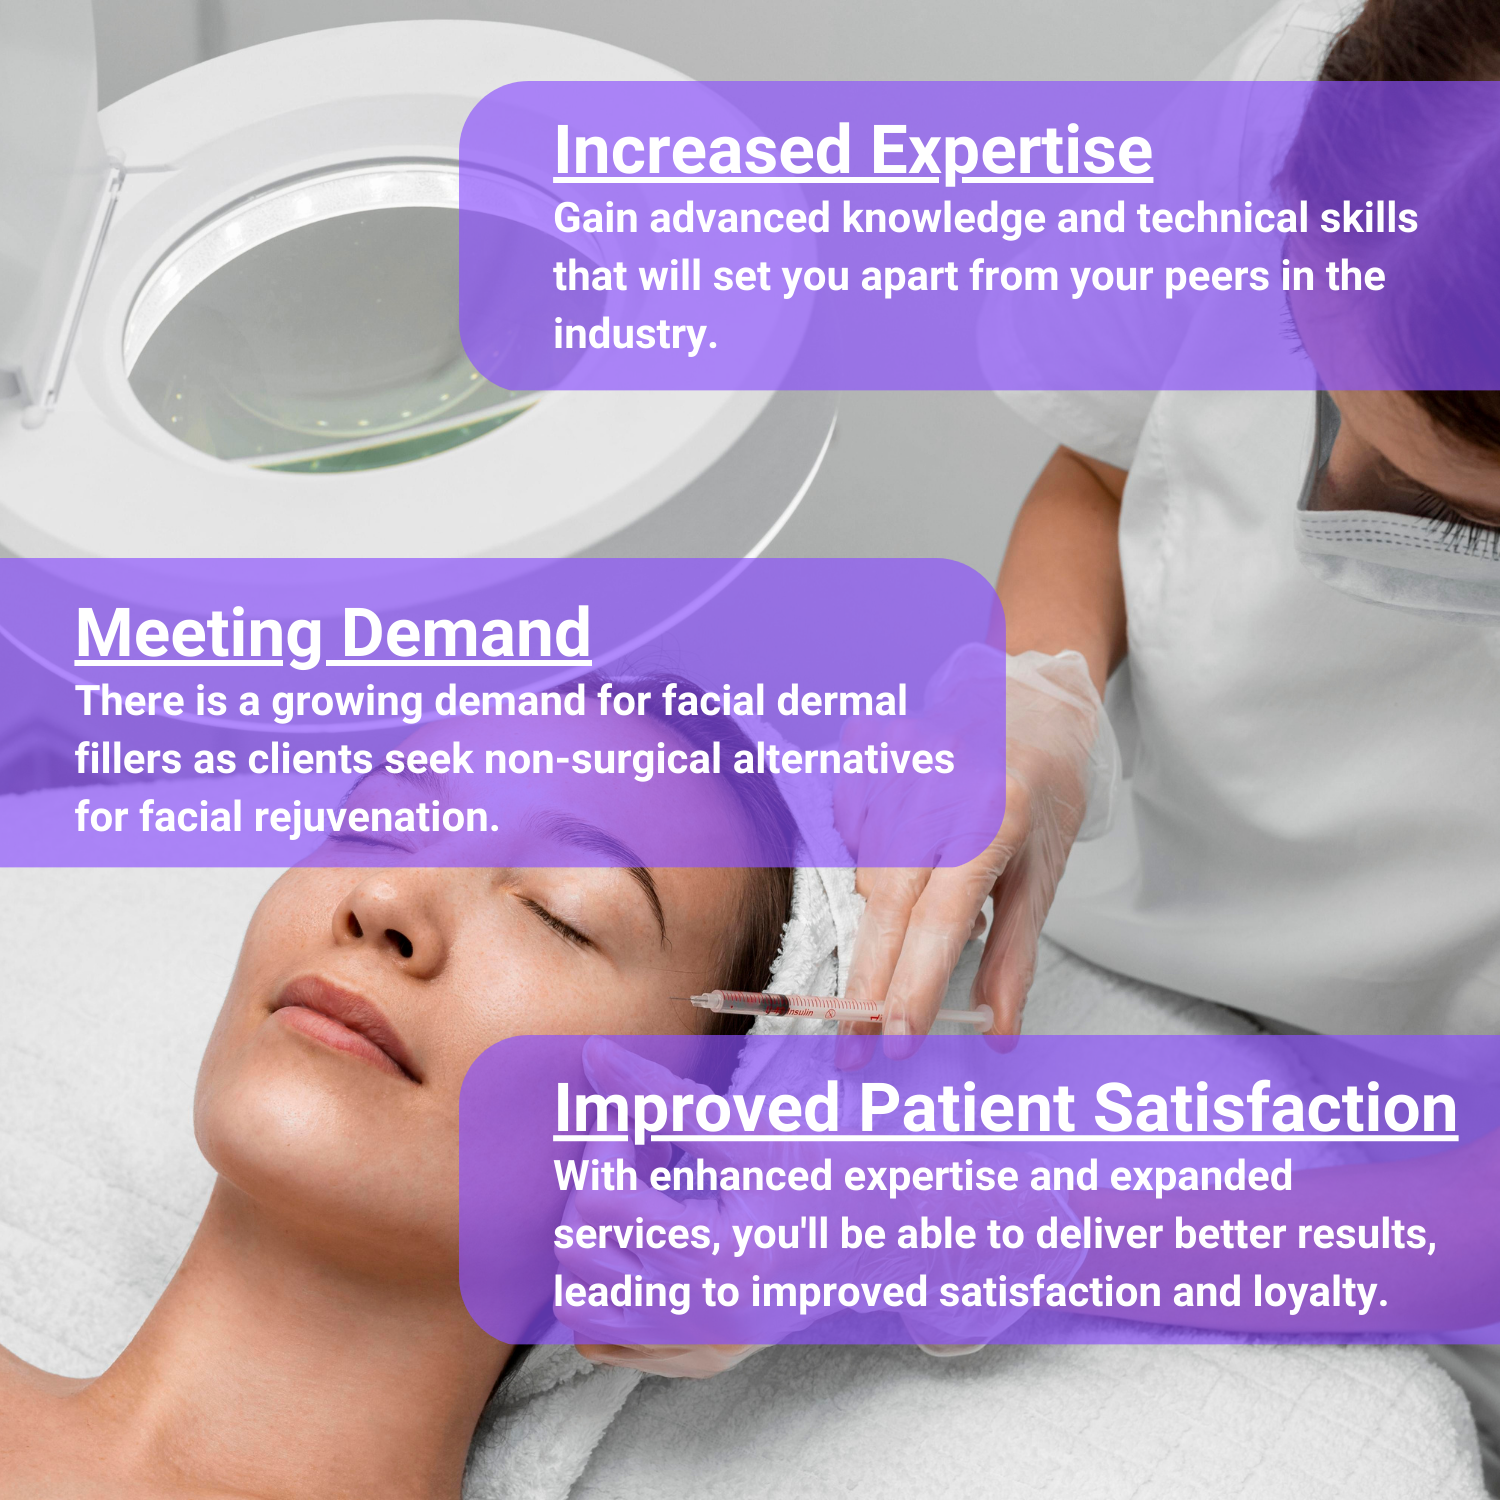 Our program can help you acquire advanced knowledge and technical skills, which can distinguish you from your colleagues in the industry. You can meet the increasing demand for facial dermal fillers as customers seek non-surgical alternatives for facial rejuvenation. Additionally, you can enhance patient satisfaction by offering improved expertise and expanded services.